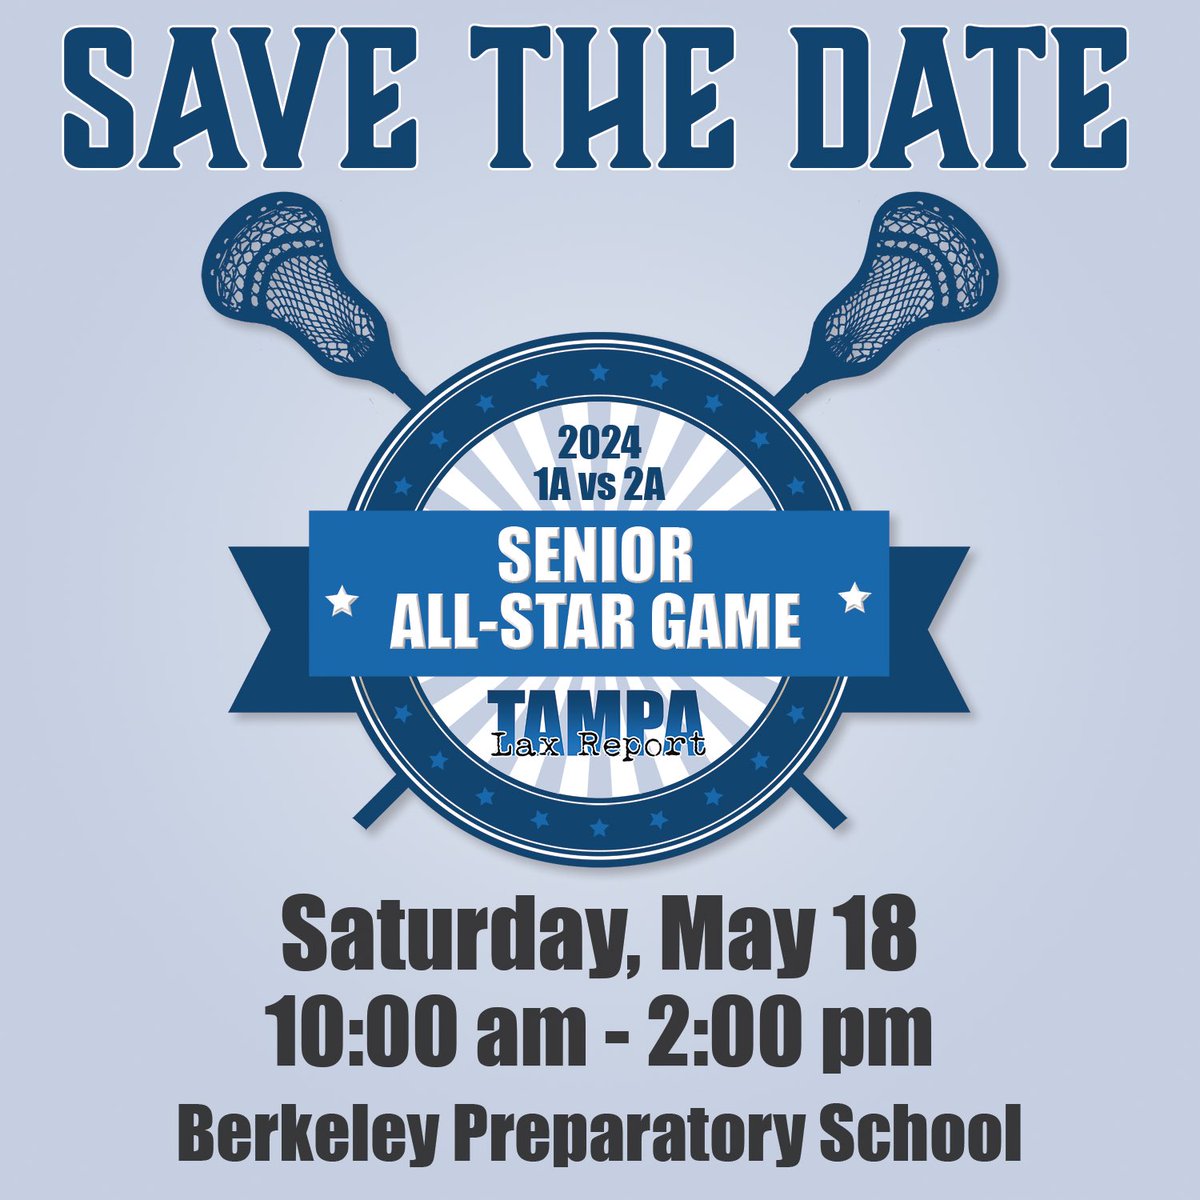 Our 7th annual Senior All-Star Games will be on Saturday, May 18th at Berkeley Preparatory School. Games will be at 10:00 am and noon. Nomination links will be going out to your coaches shortly. More details to come! @FloridaLX @TampaLacrosse @Biggamebobby